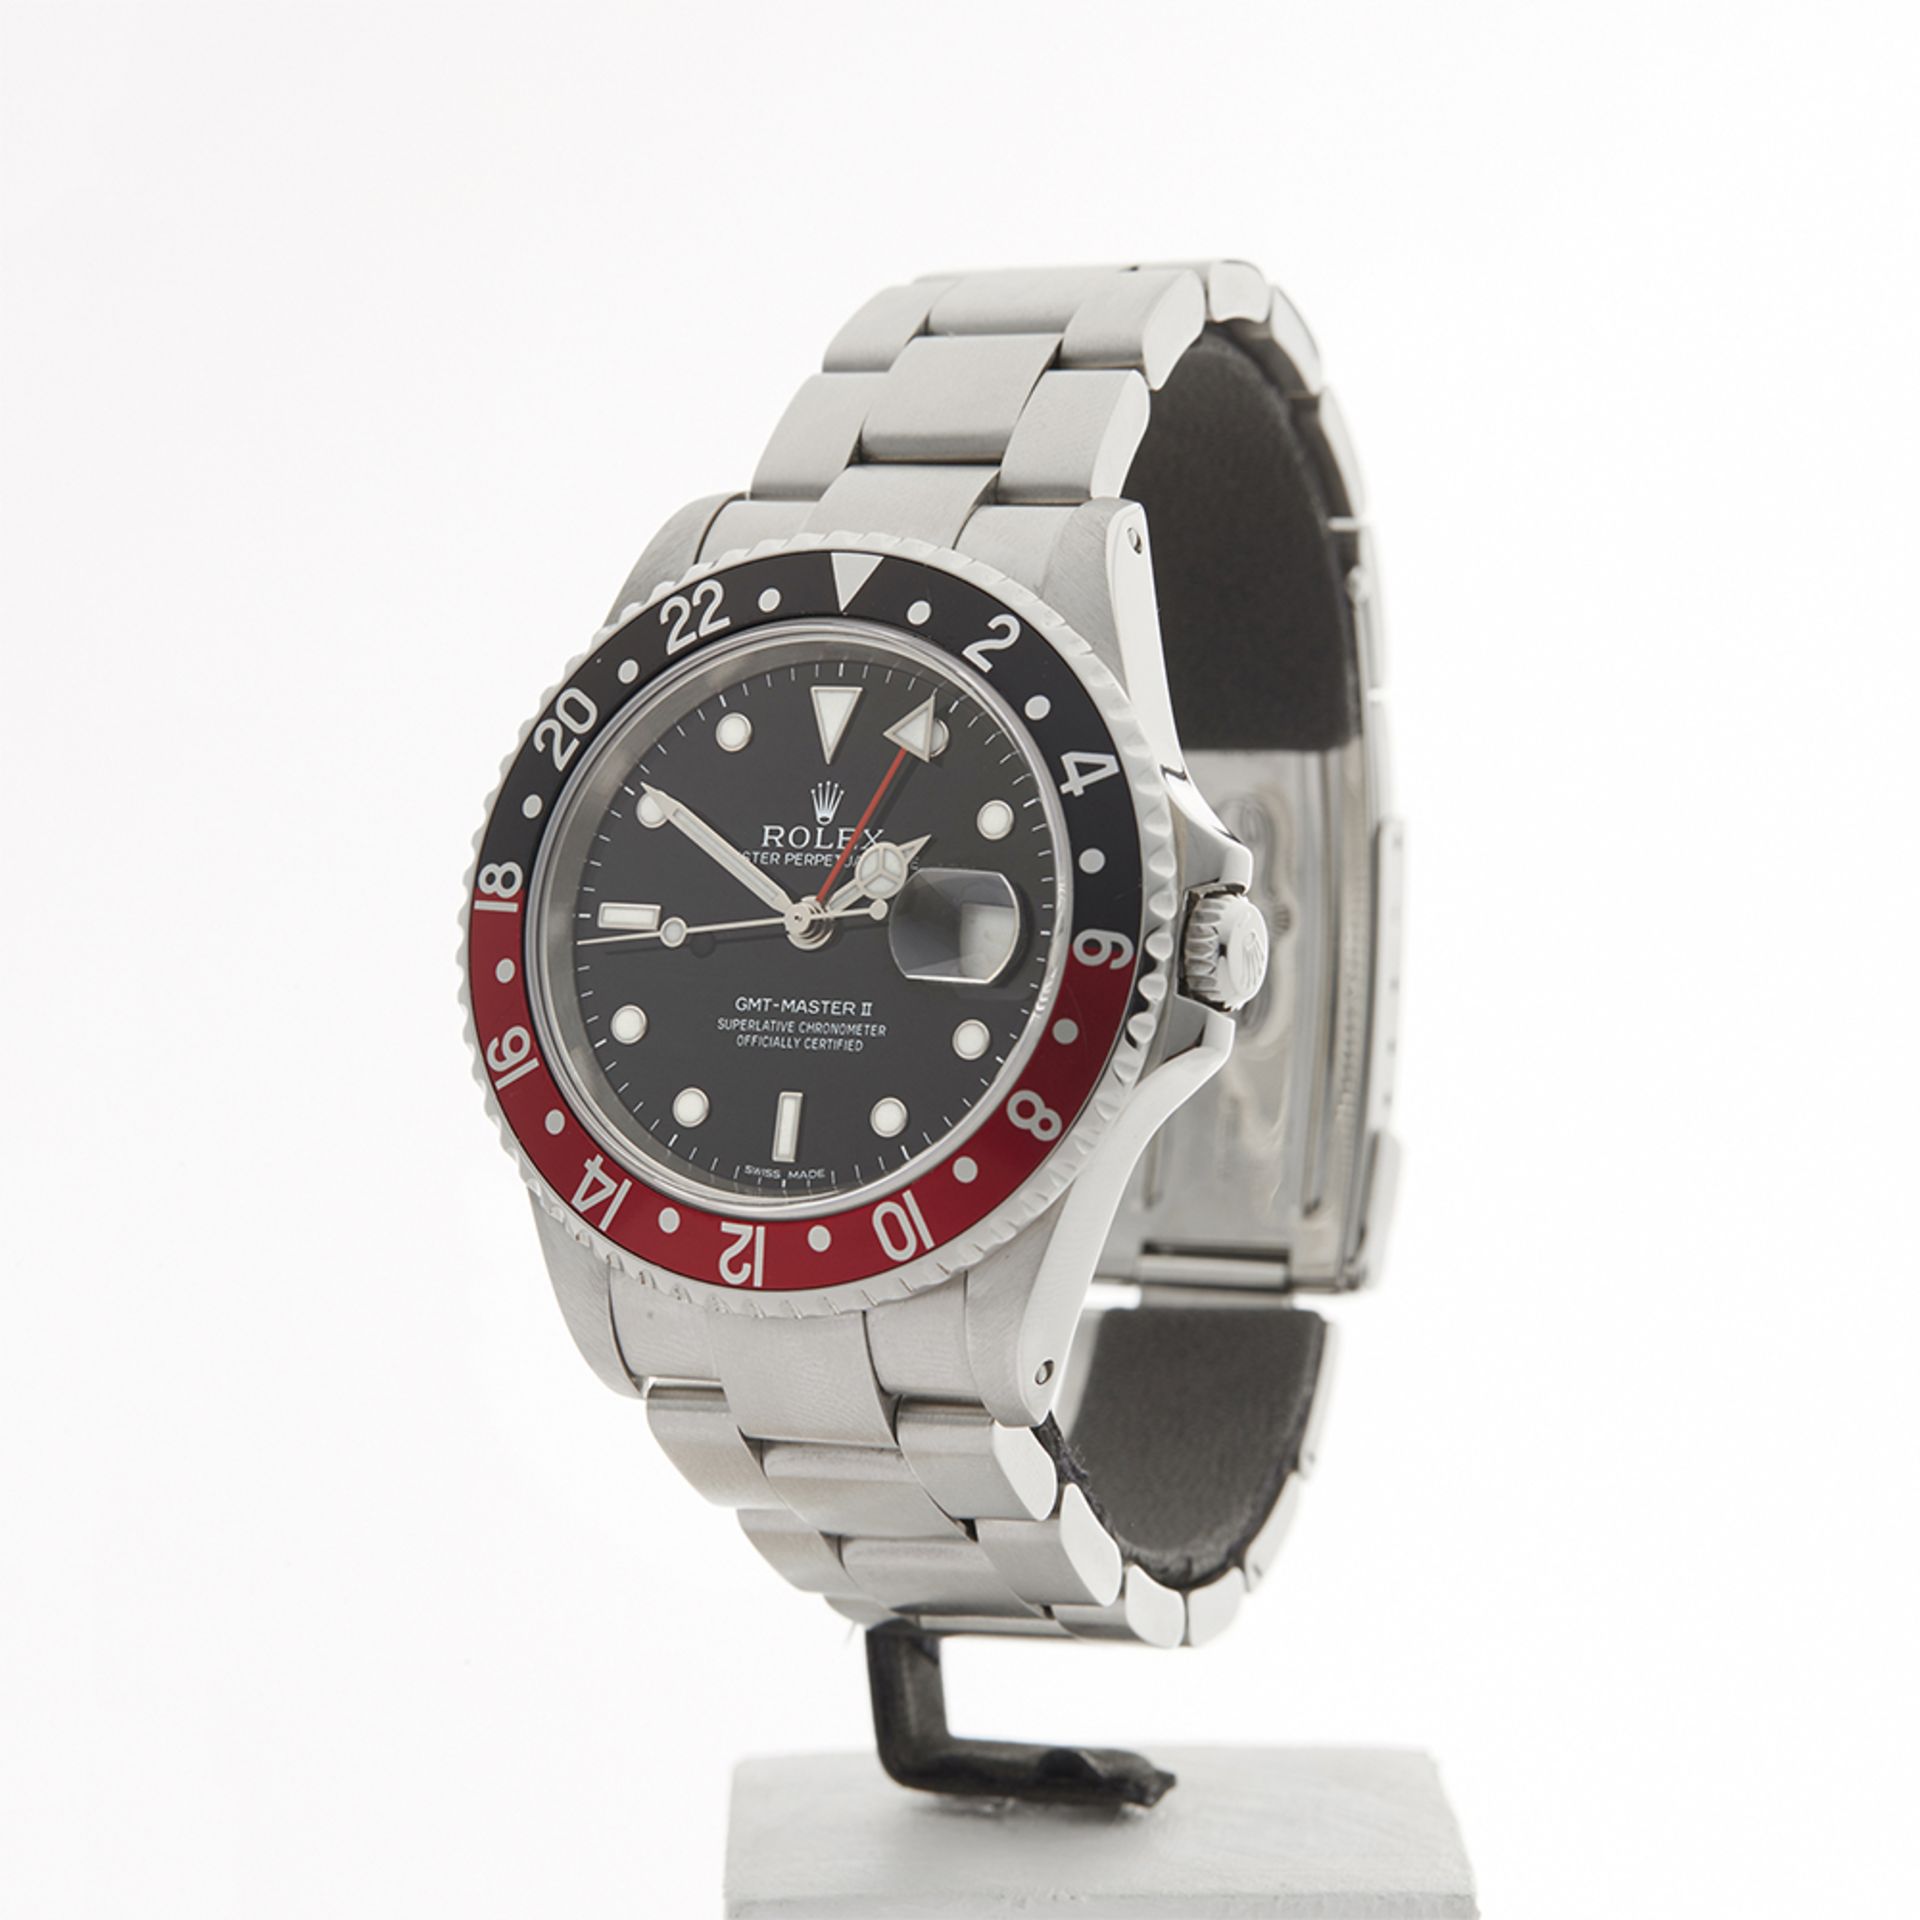 Rolex GMT-Master II Coke 40mm Stainless Steel 16710 - Image 3 of 9